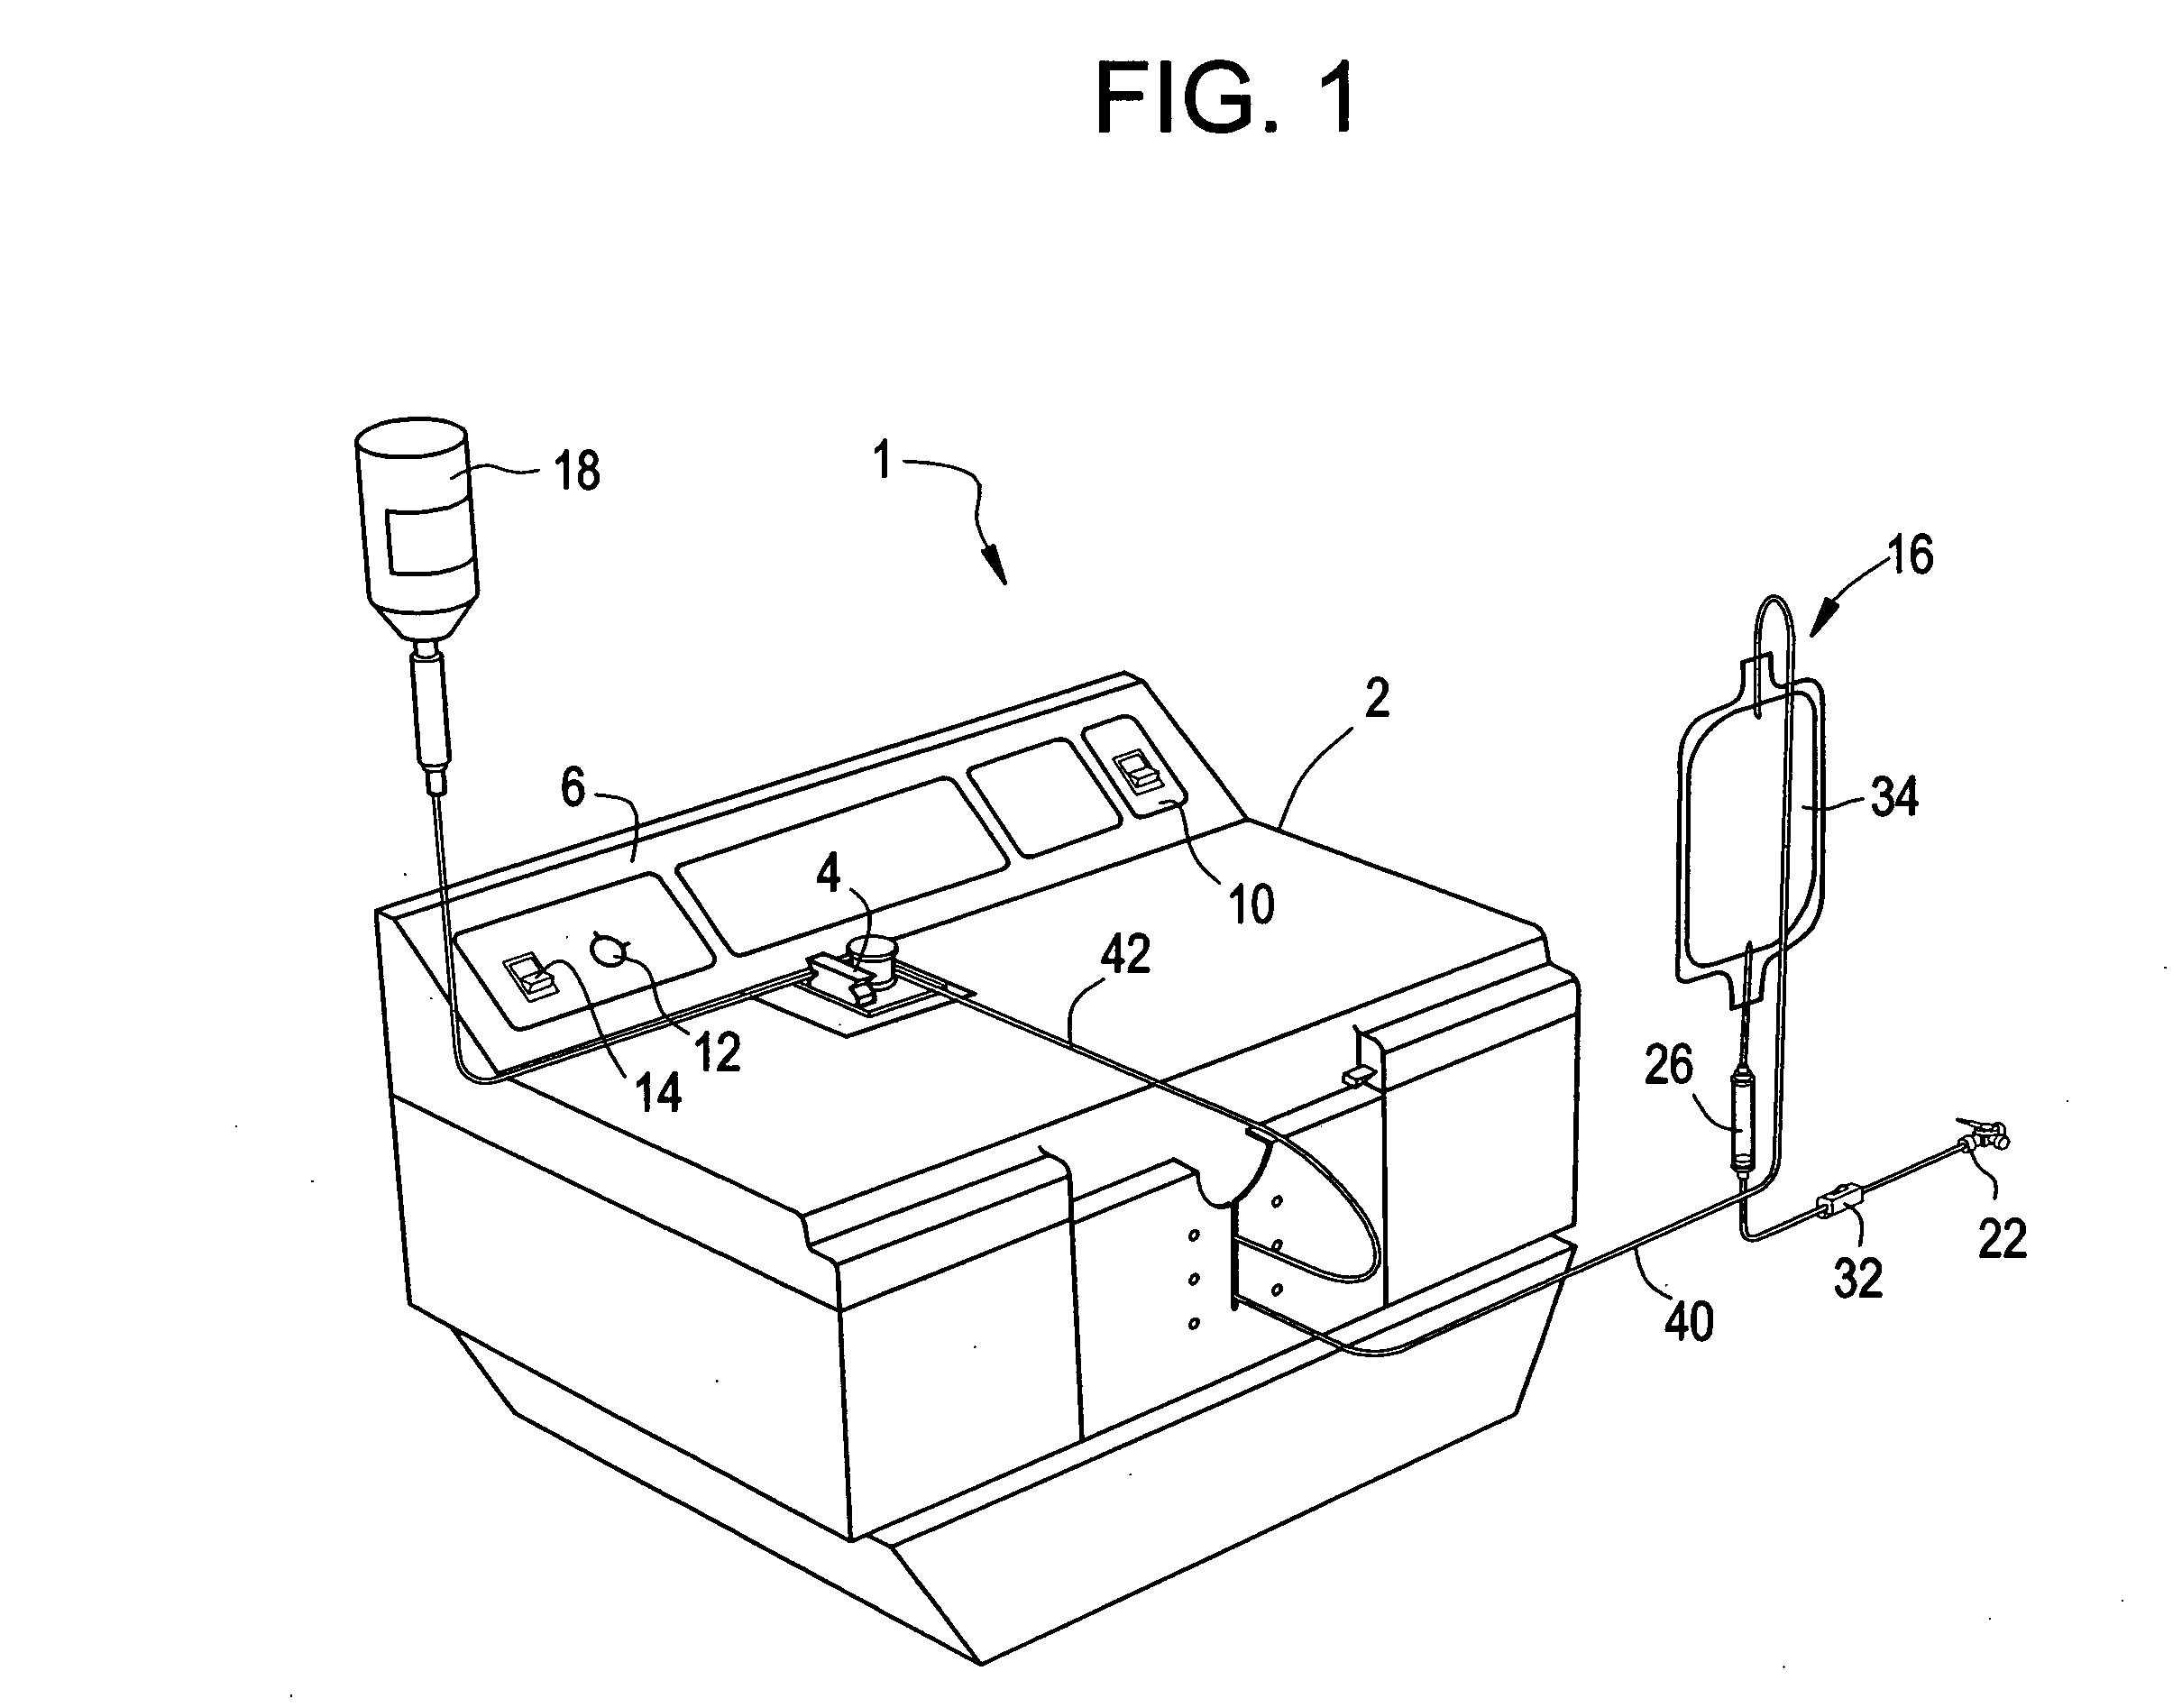 Blood irradiation system, associated devices and methods for irradiating blood